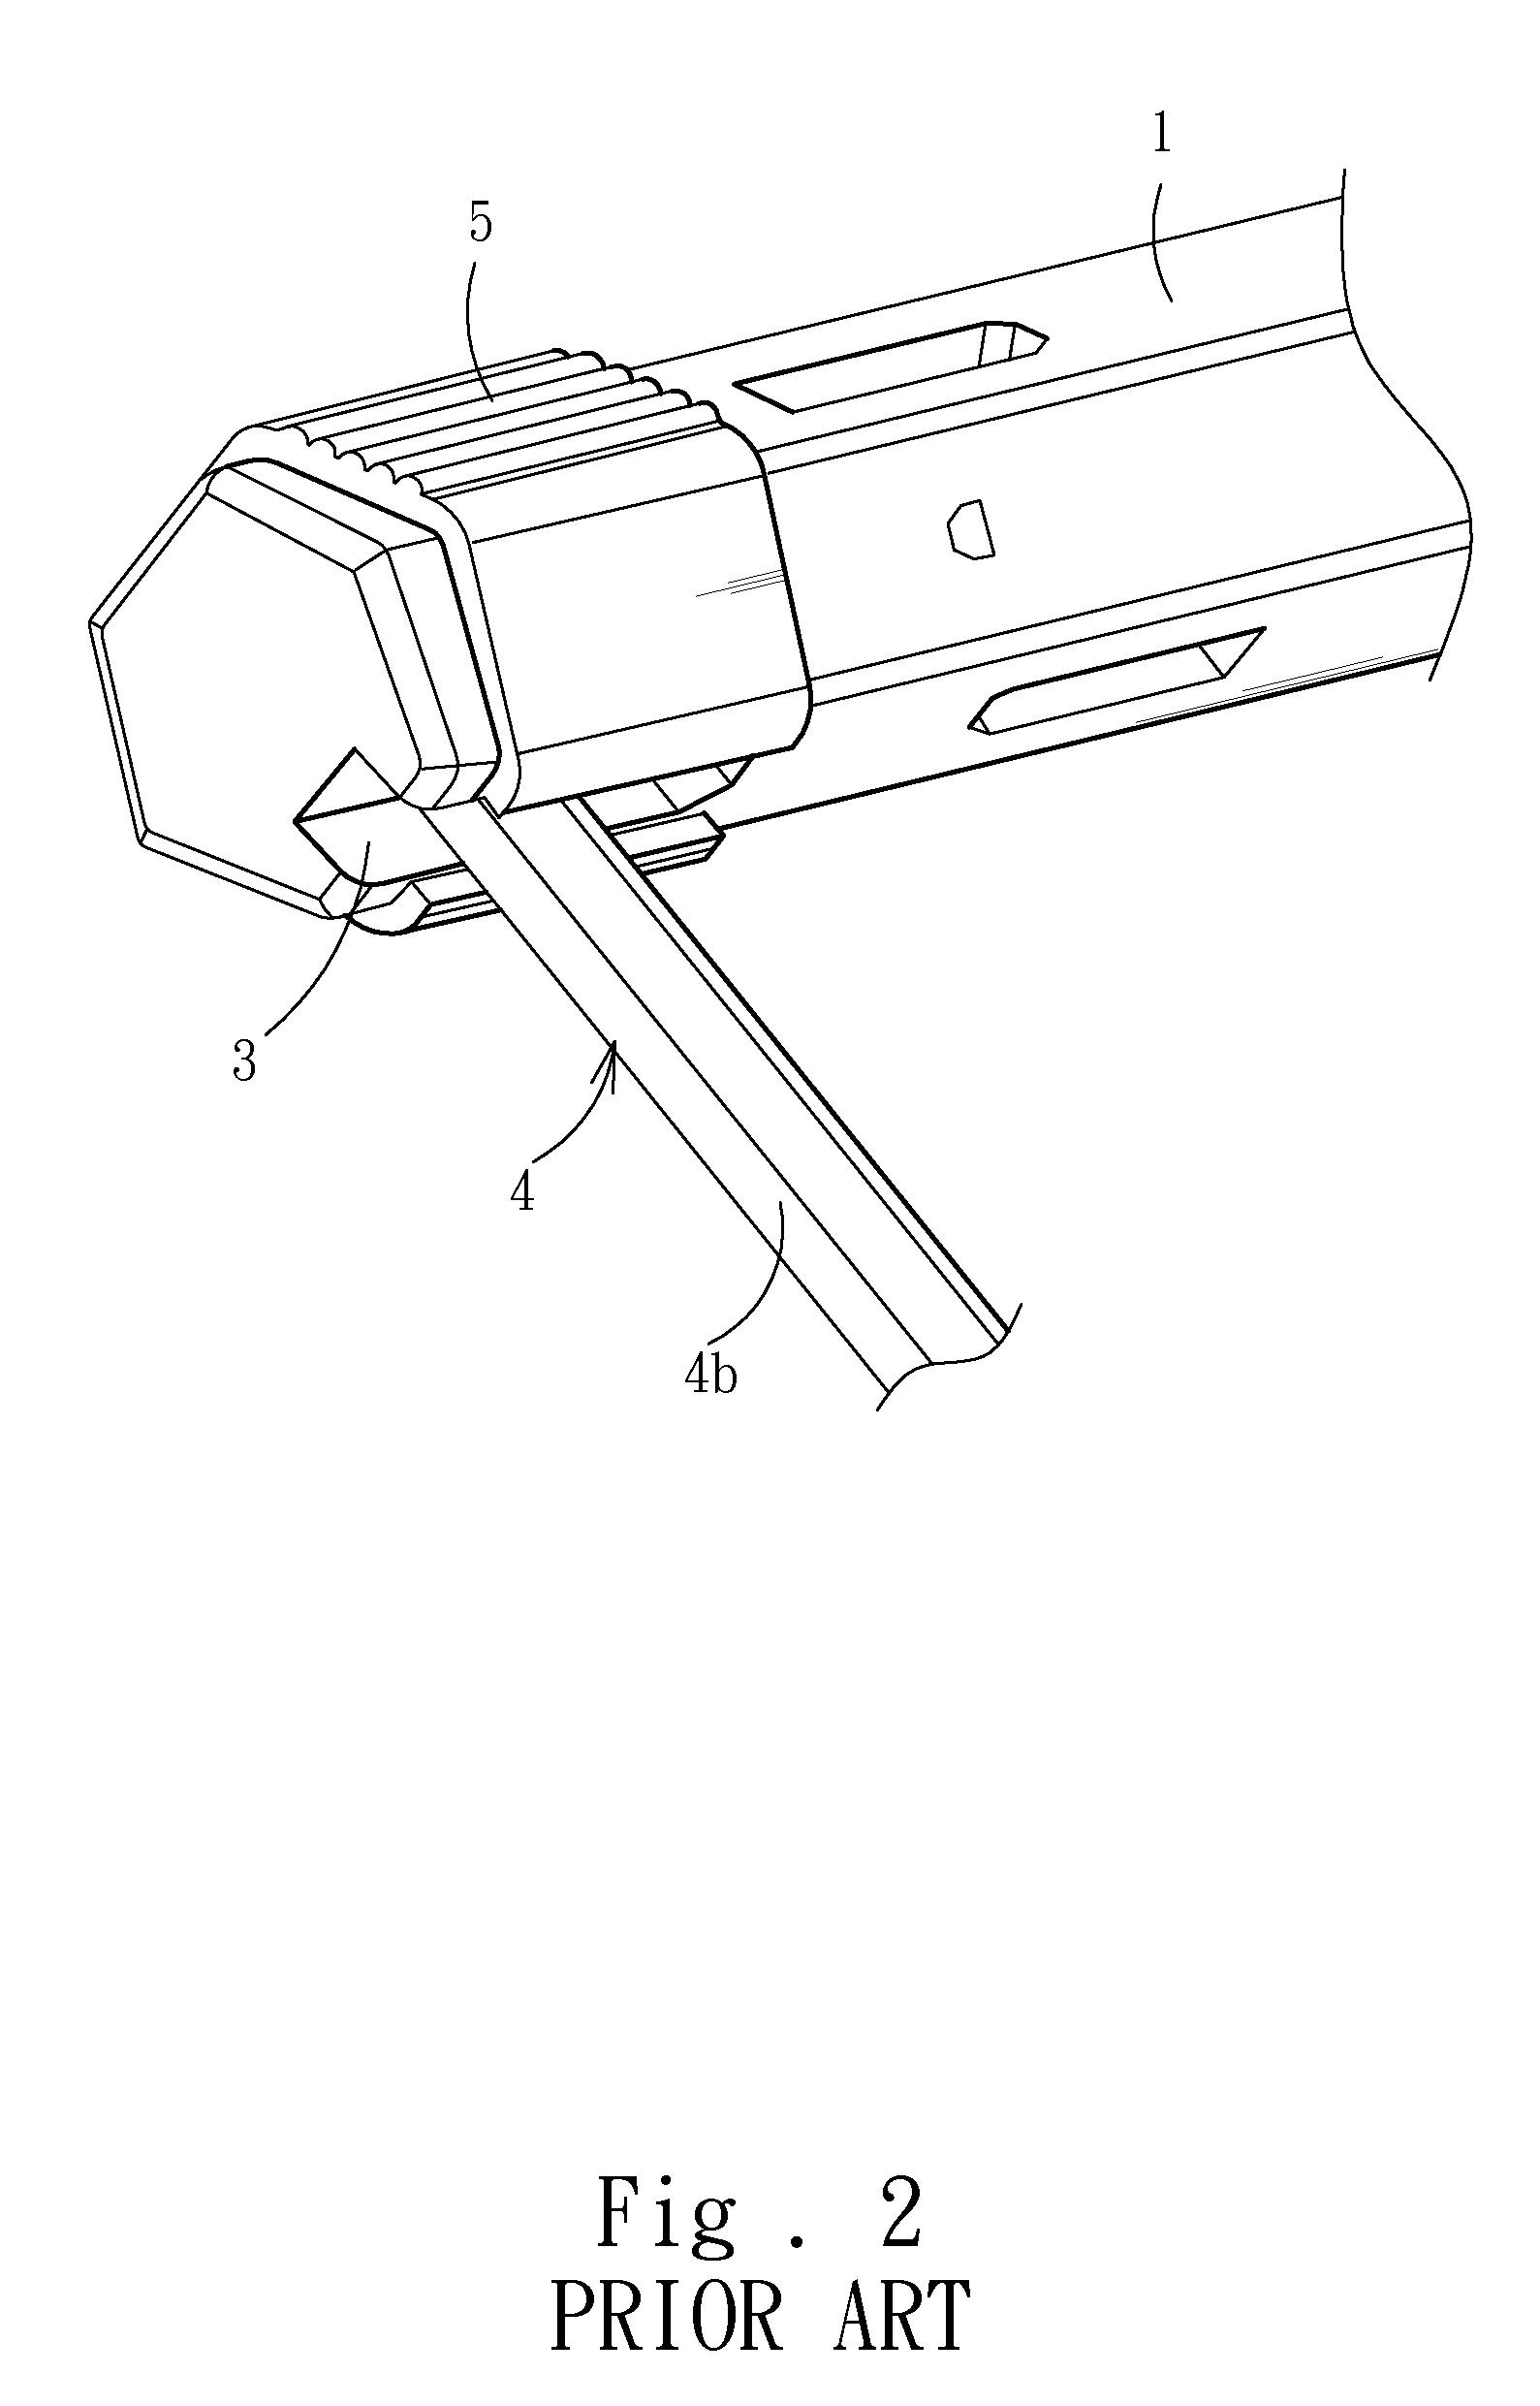 Hexagon spanner handle for increasing turning force